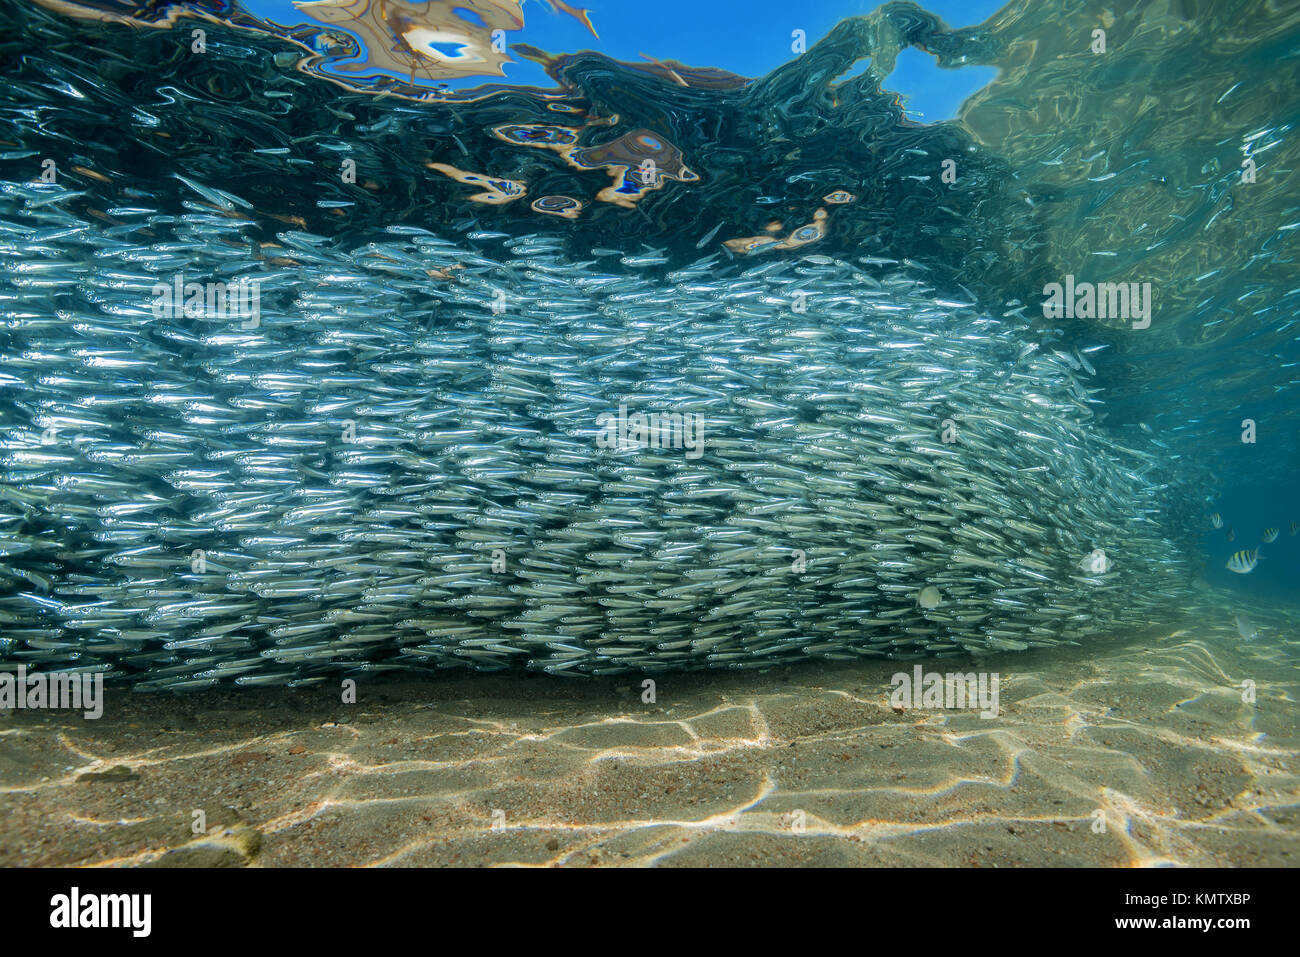 Massive school of fish in shallow water Stock Photo